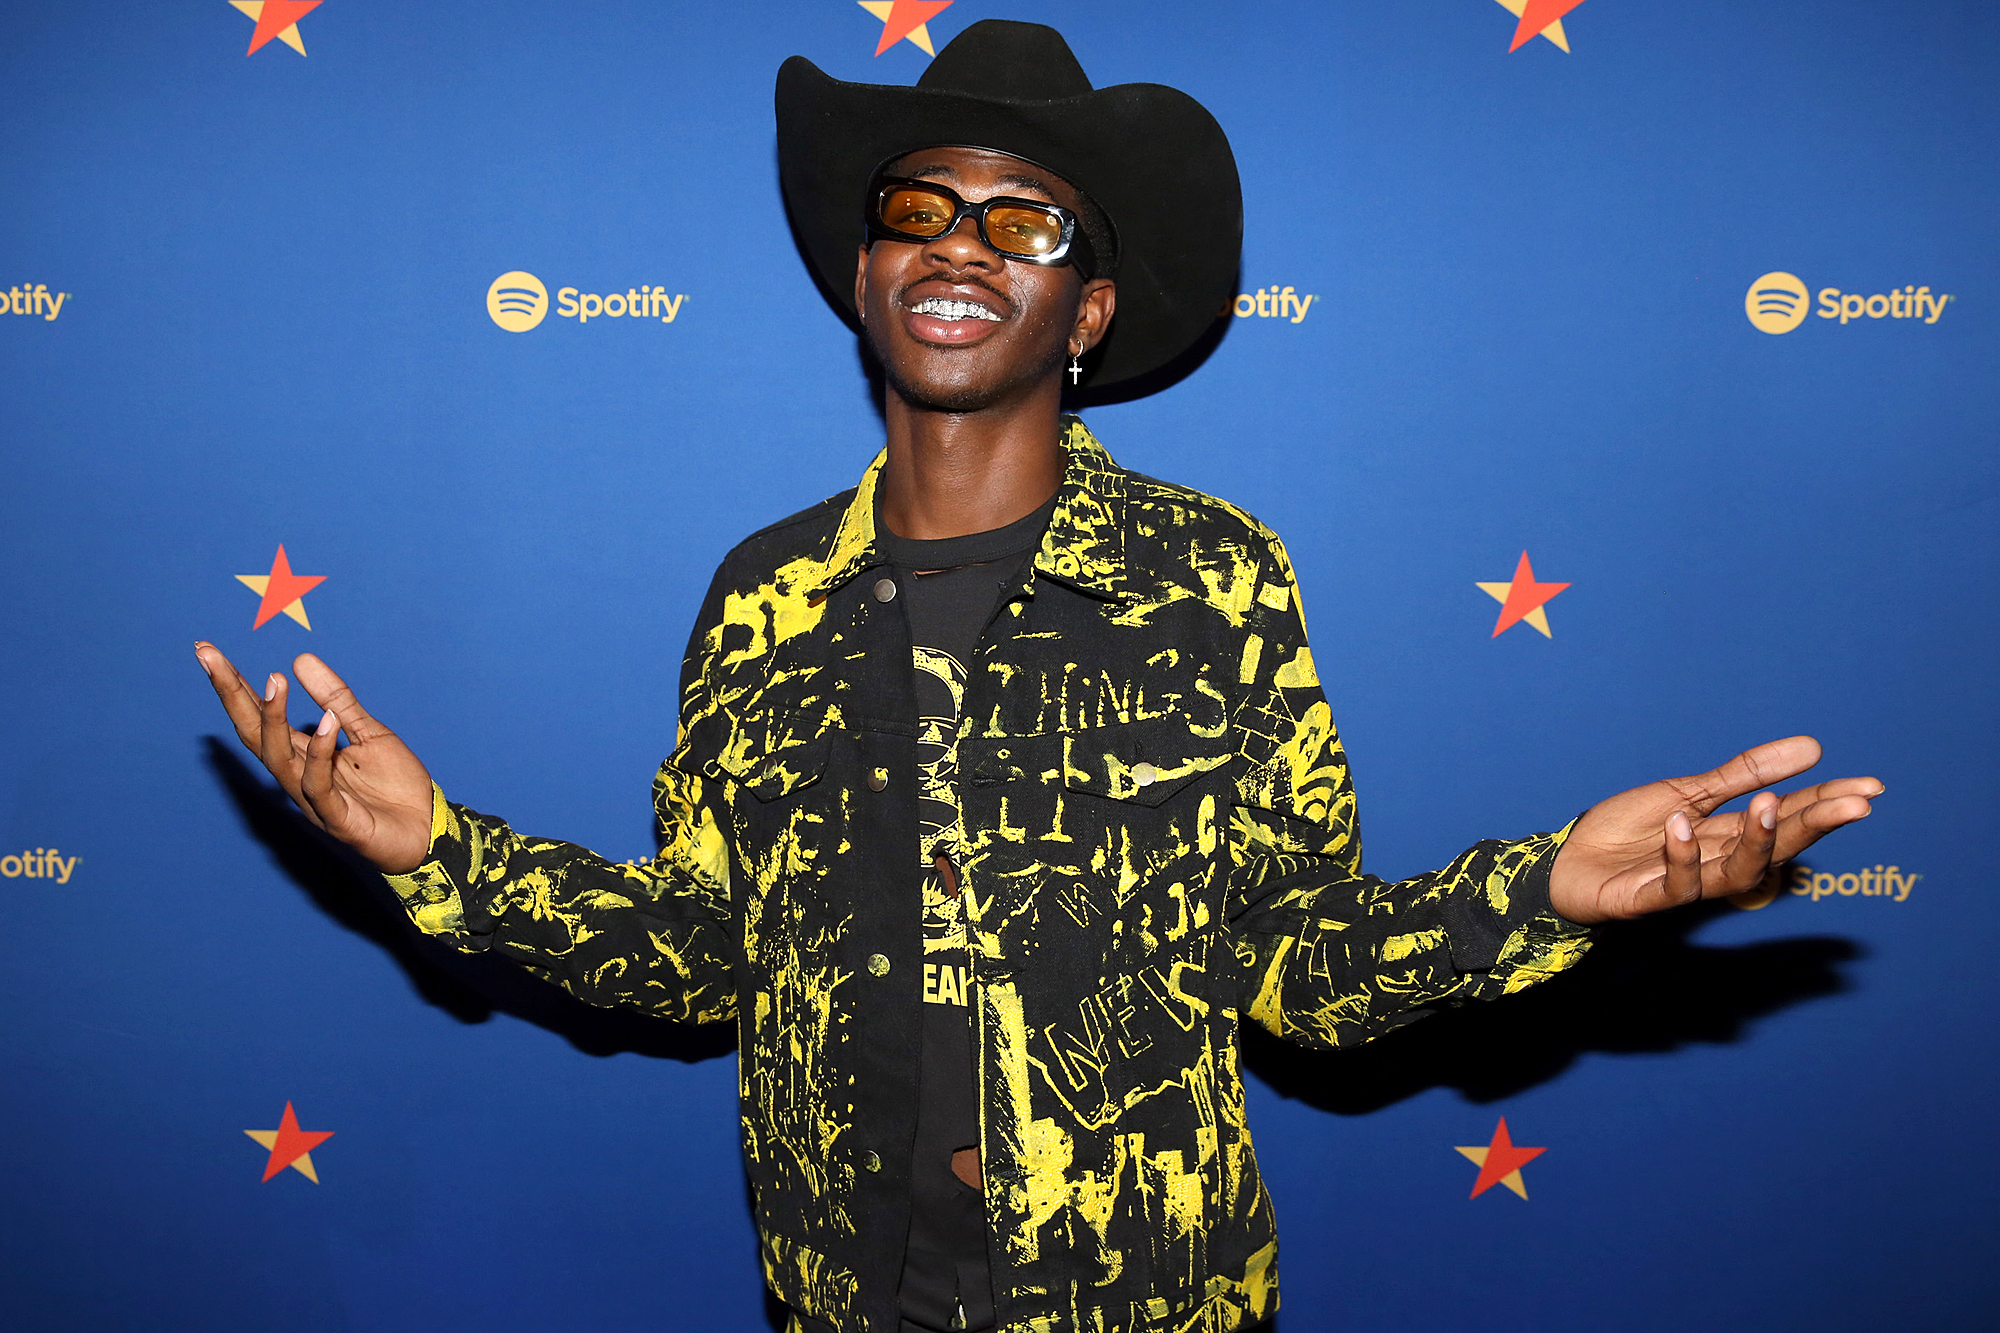 Lil Nas X Drops EP featuring Cardi B and Old Town Road